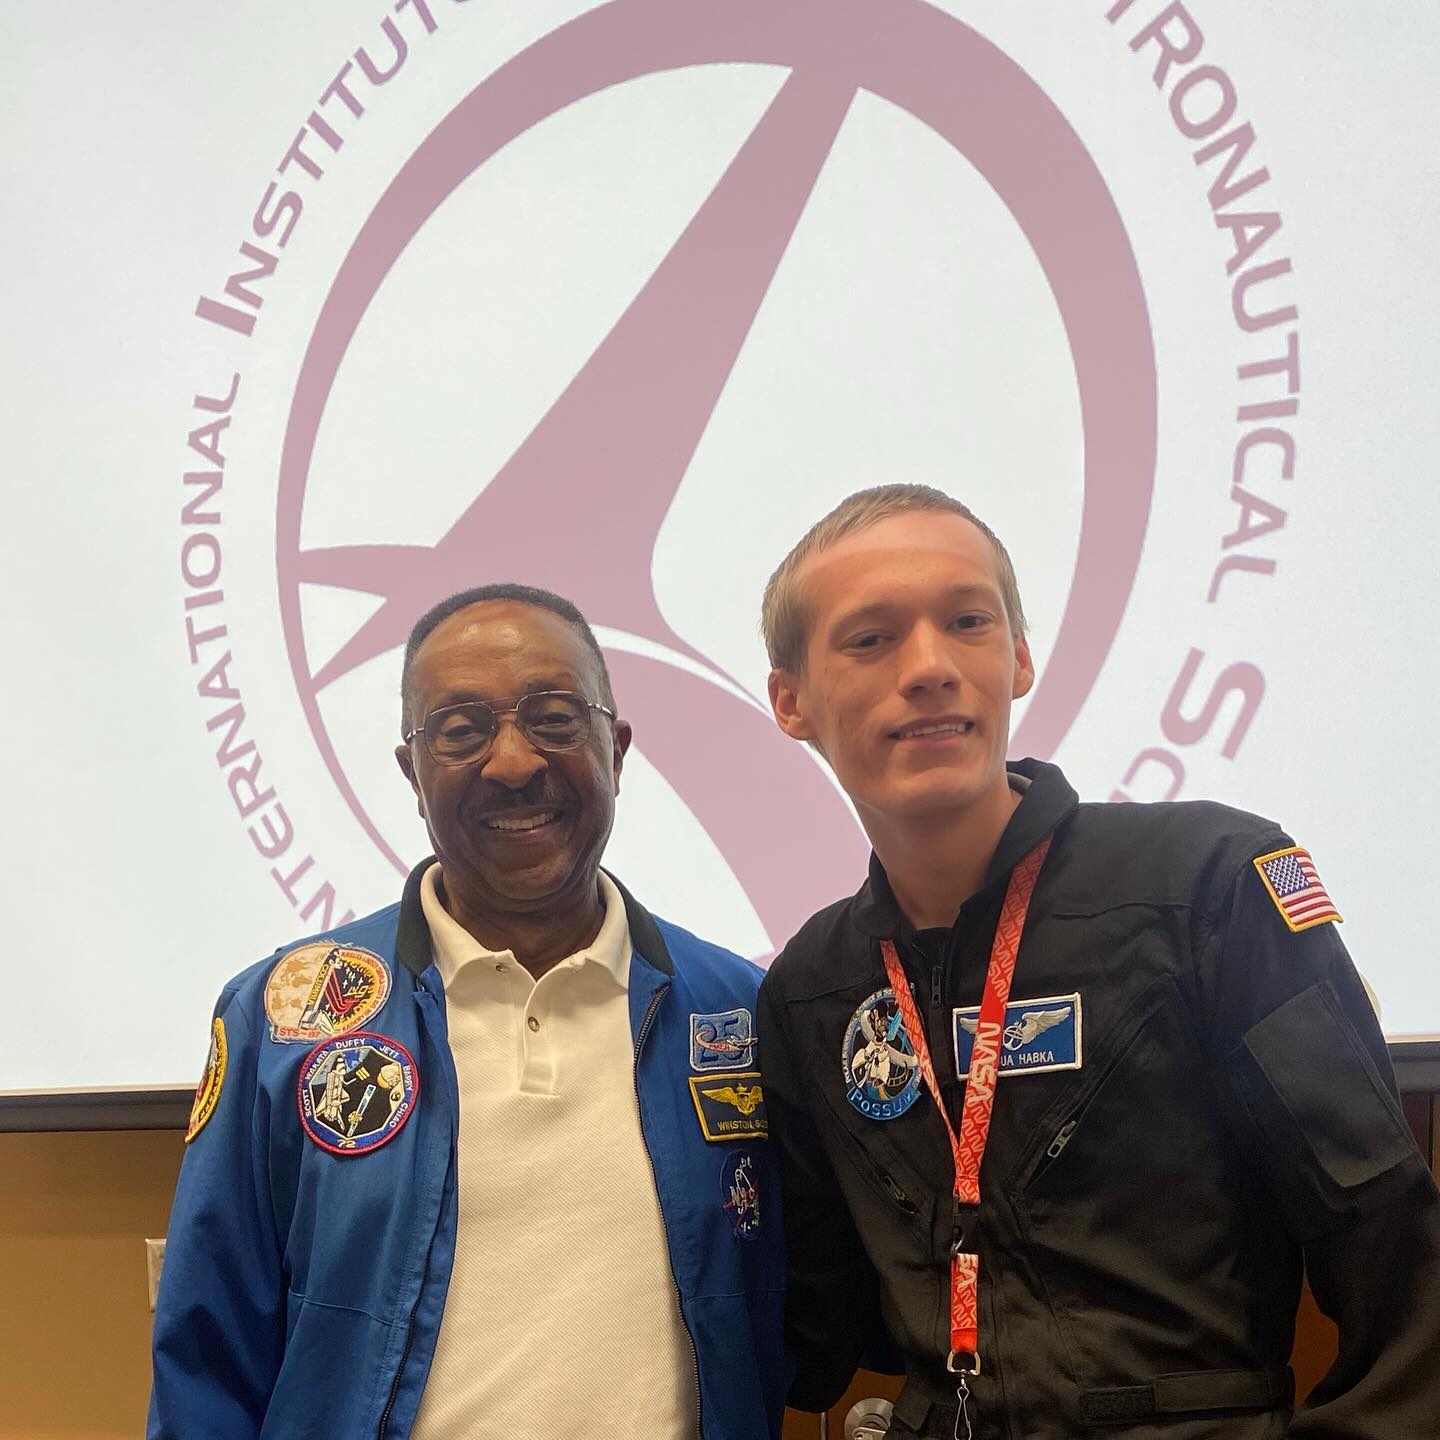 First day of the PoSSUM Advanced Space Academy was exciting! Learned about space flight psychology, life support systems